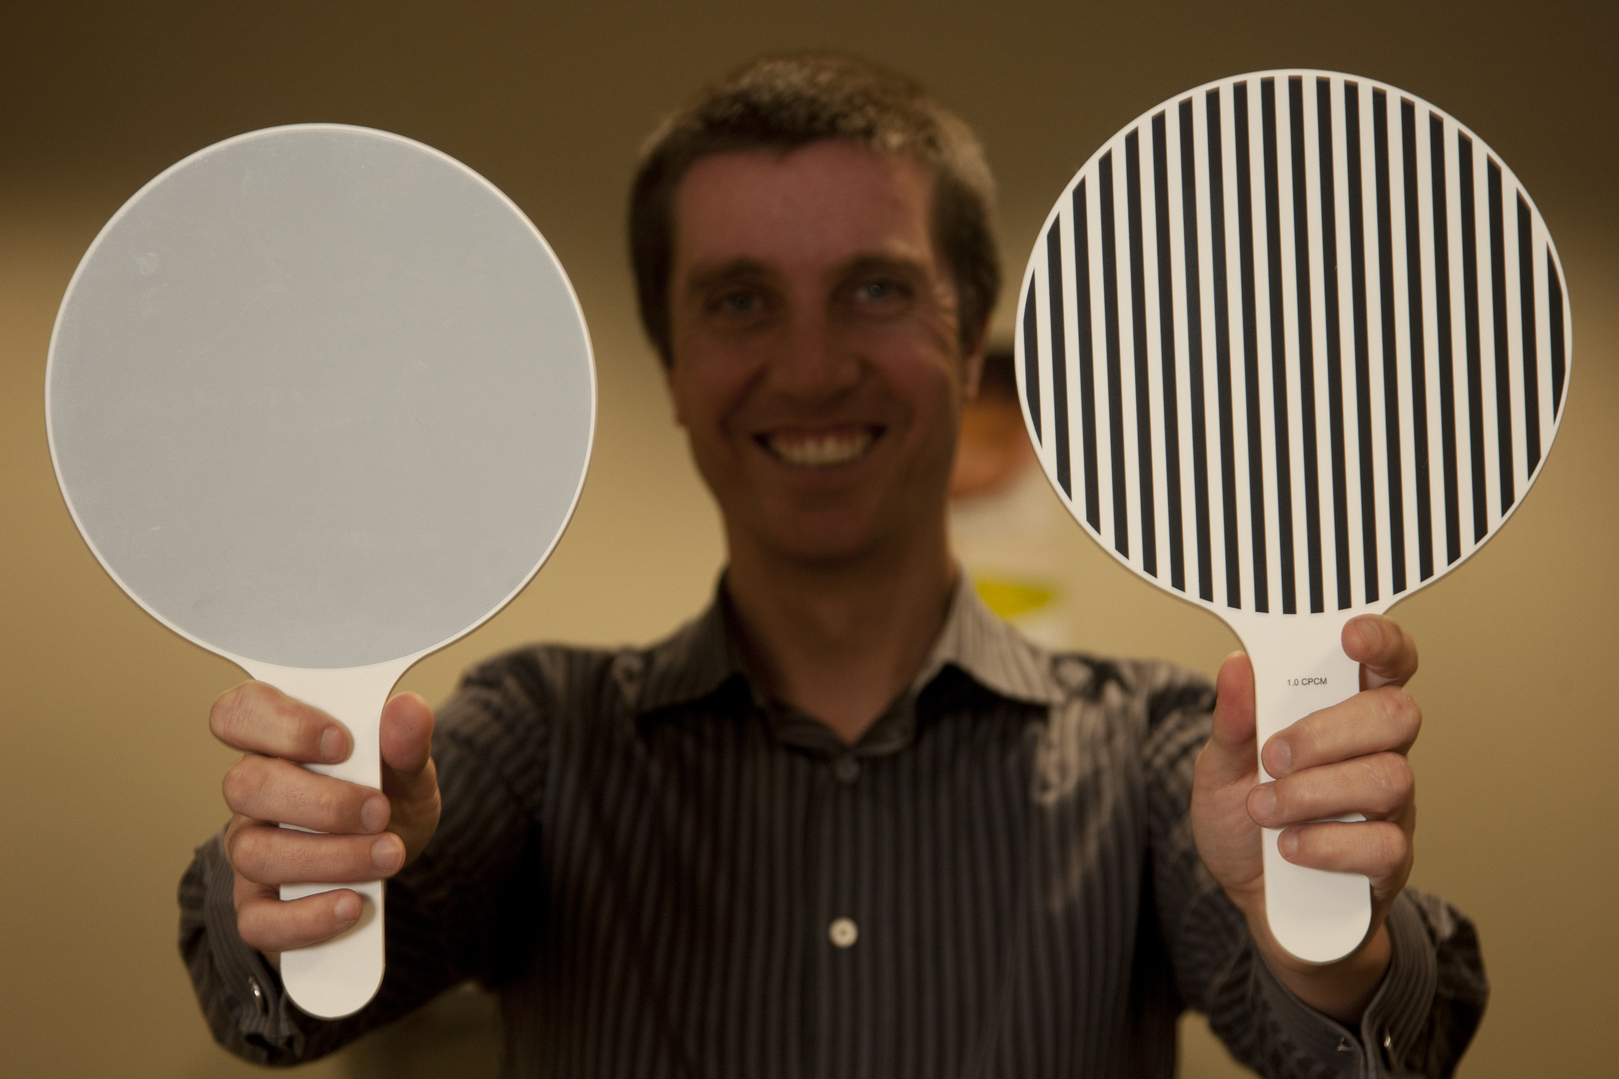 Man holds up two paddles, one is striped and the other is grey.